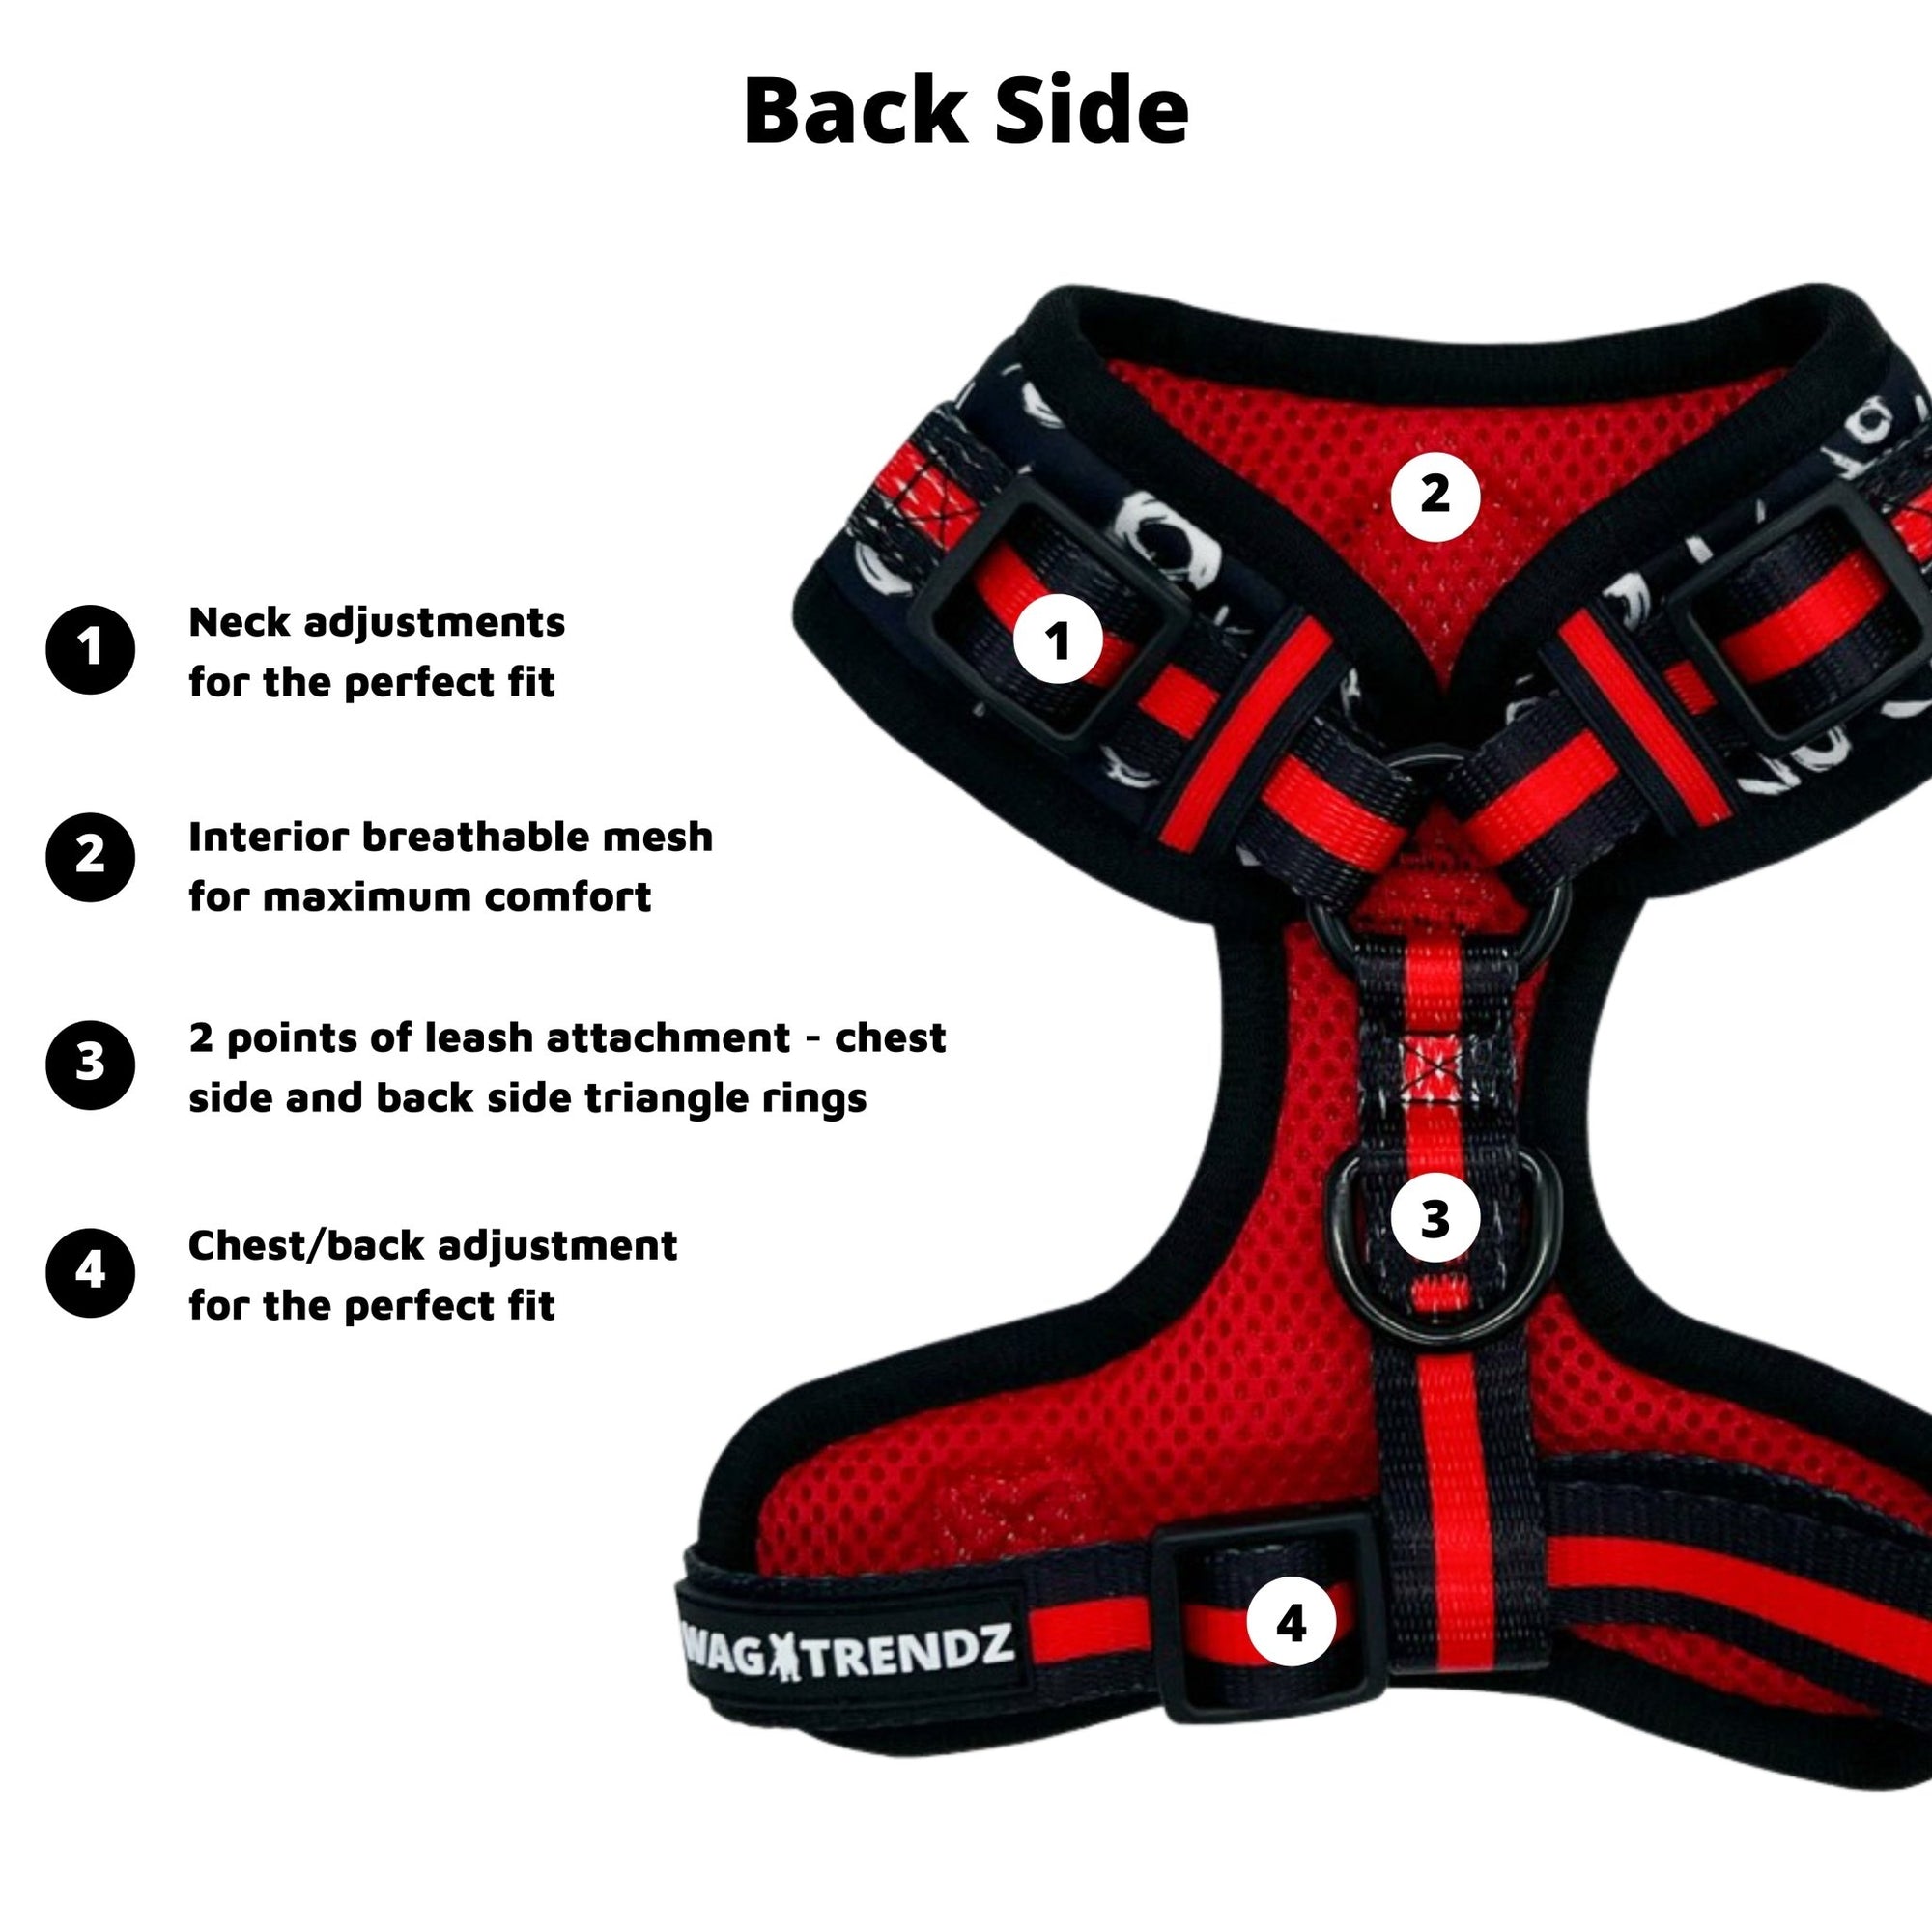 Dog Collar Harness and Leash Set- Dog Harness Vest in black and white XO&#39;s with bold red accents - product feature captions - back side - against solid white background - Wag Trendz